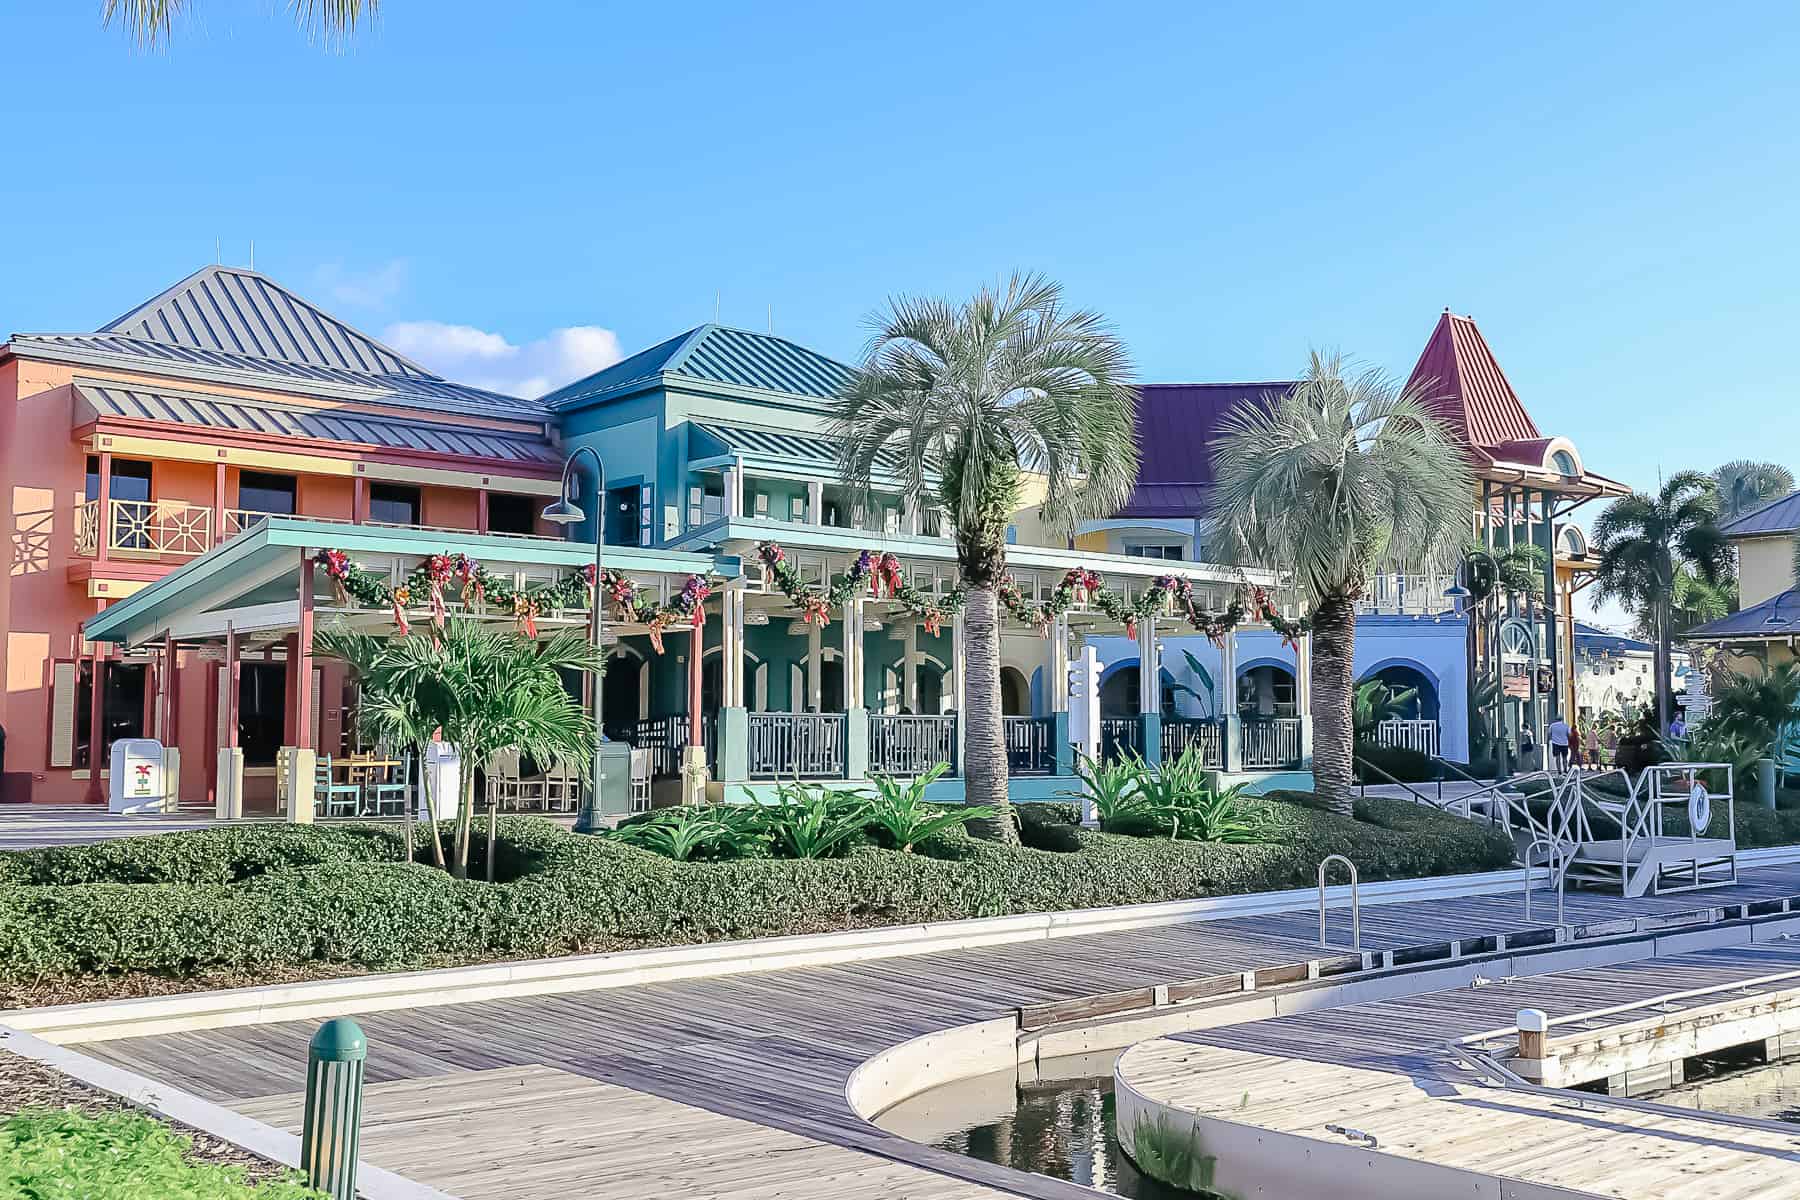 Old Port Royale at Disney's Caribbean Beach draped in holiday garland